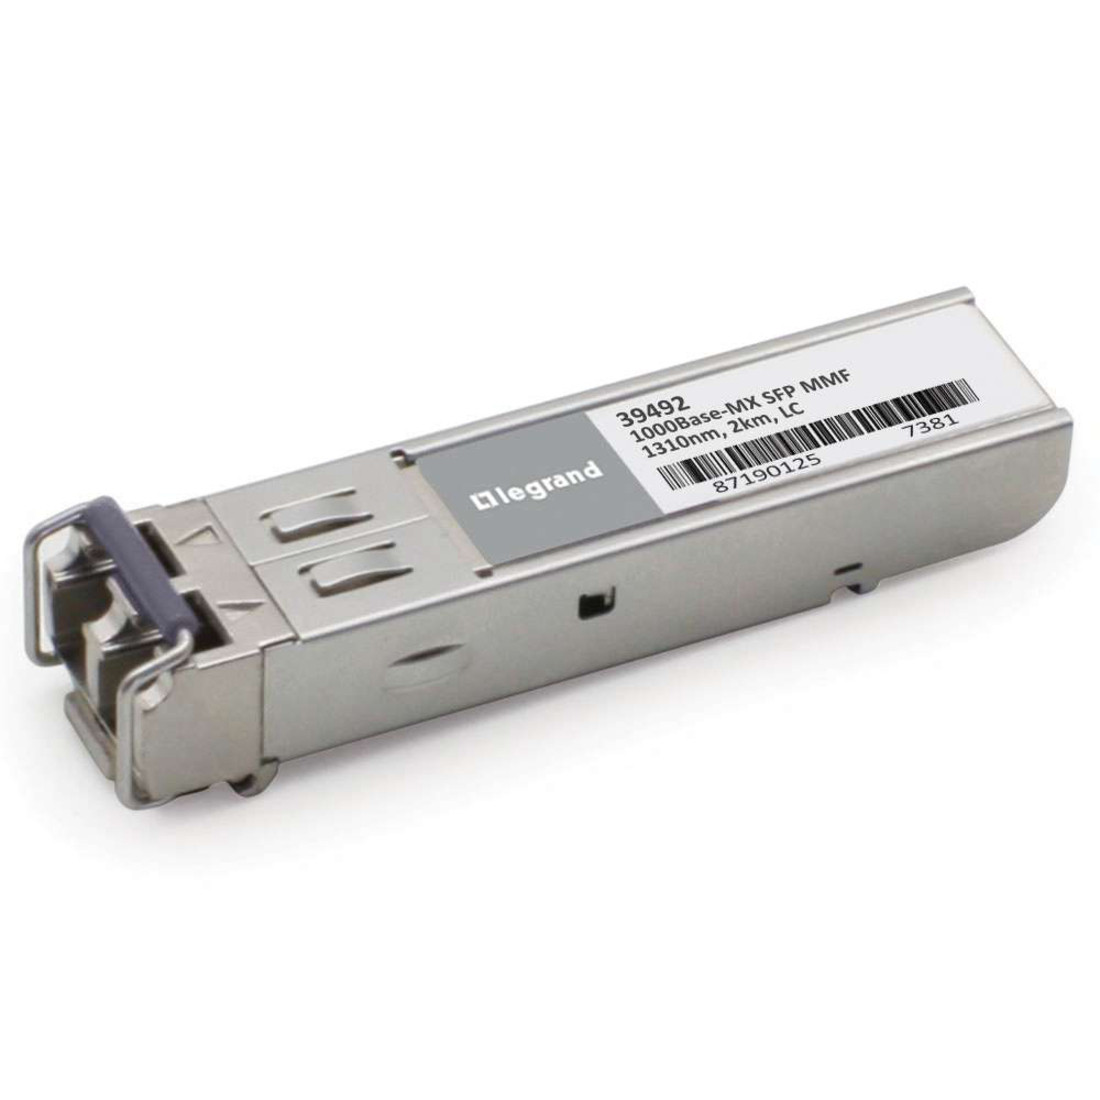 C2G Enterasys MGBIC-LC03 Compatible 1000Base-MX MMF SFP (mini-GBIC) Transceiver ModuleFor Optical Network, Data Networking1 x LC 1000Base-MX… 39492